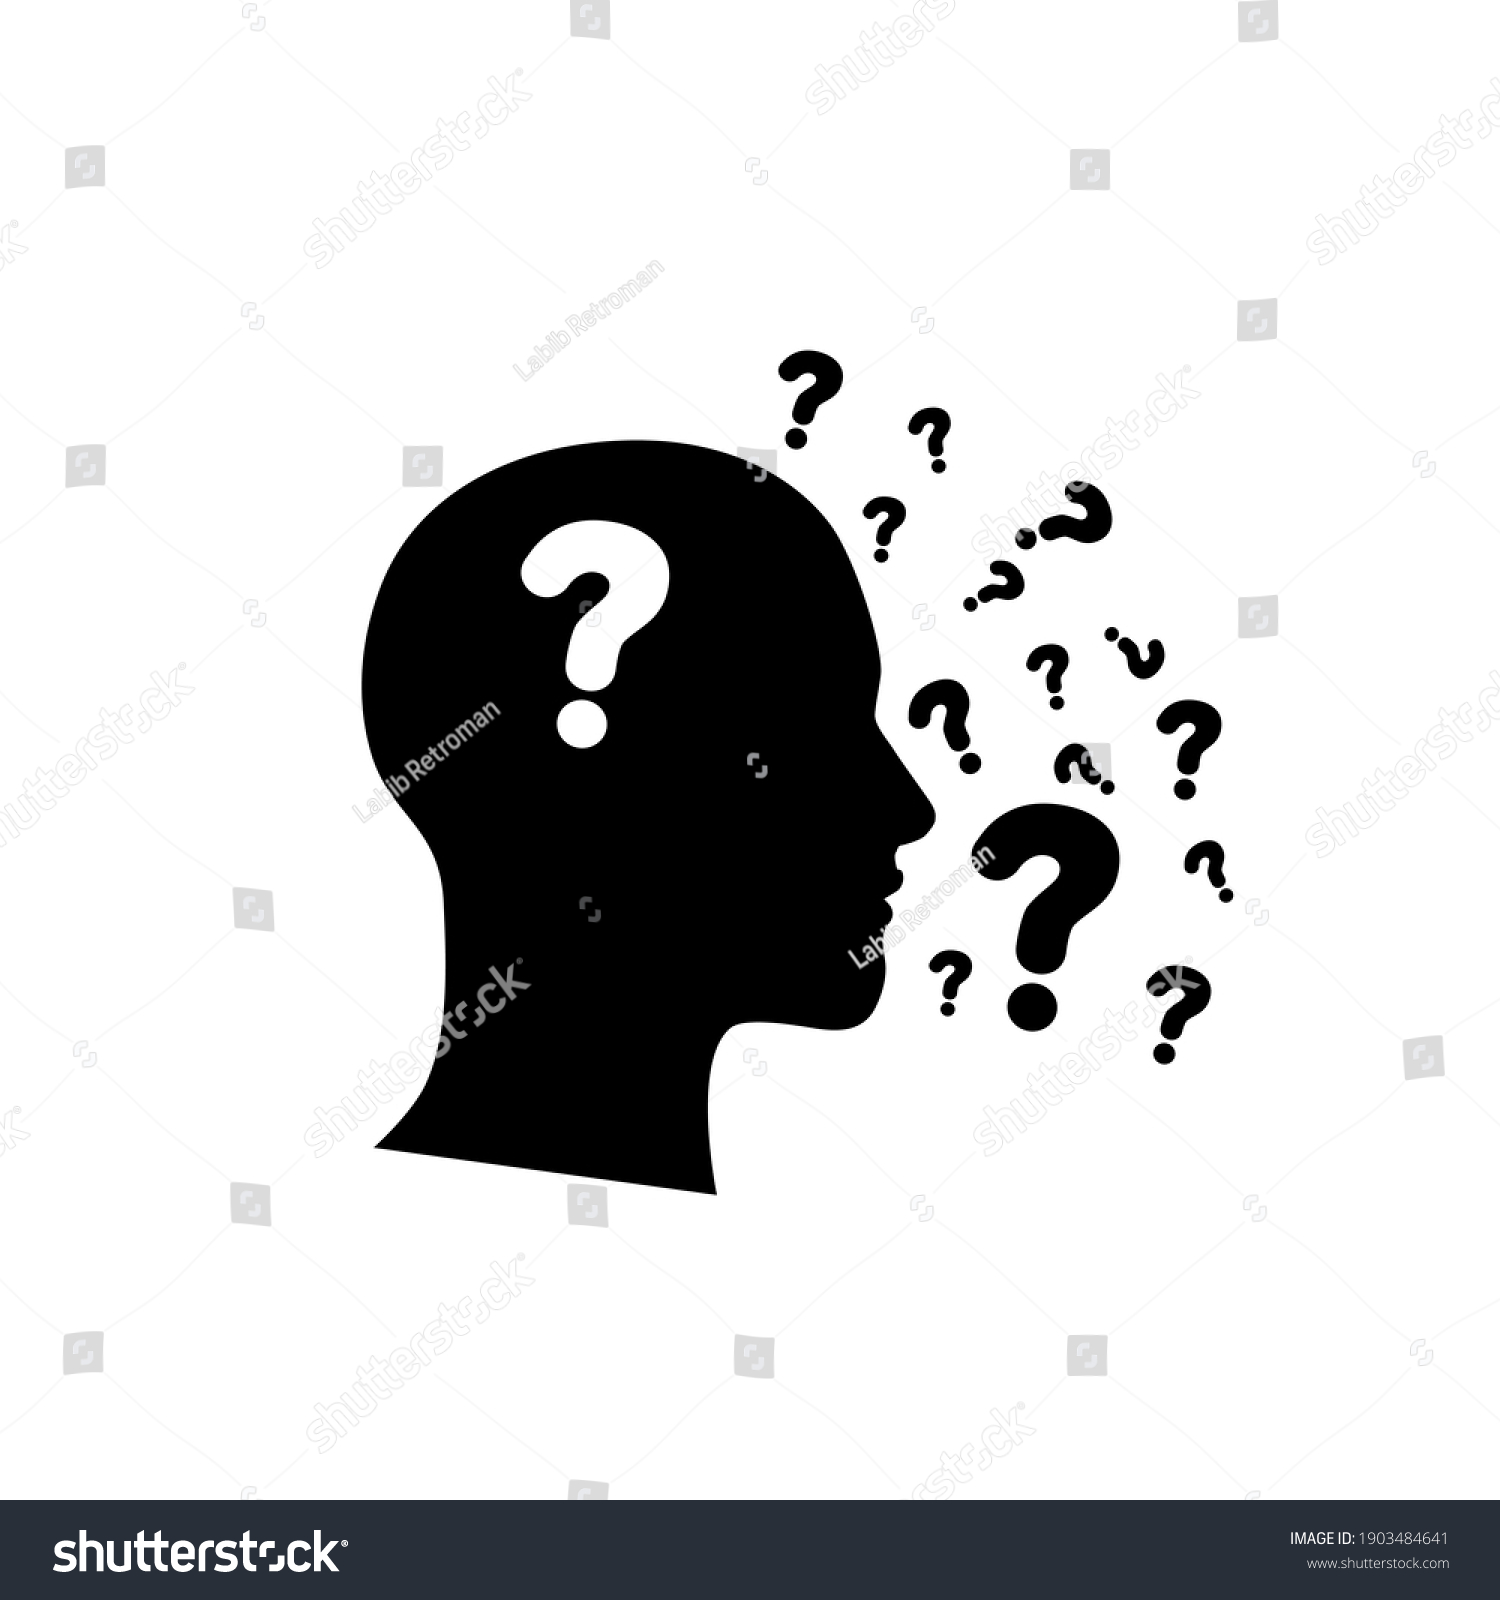 SVG of Speechless human icon with question mark design. svg